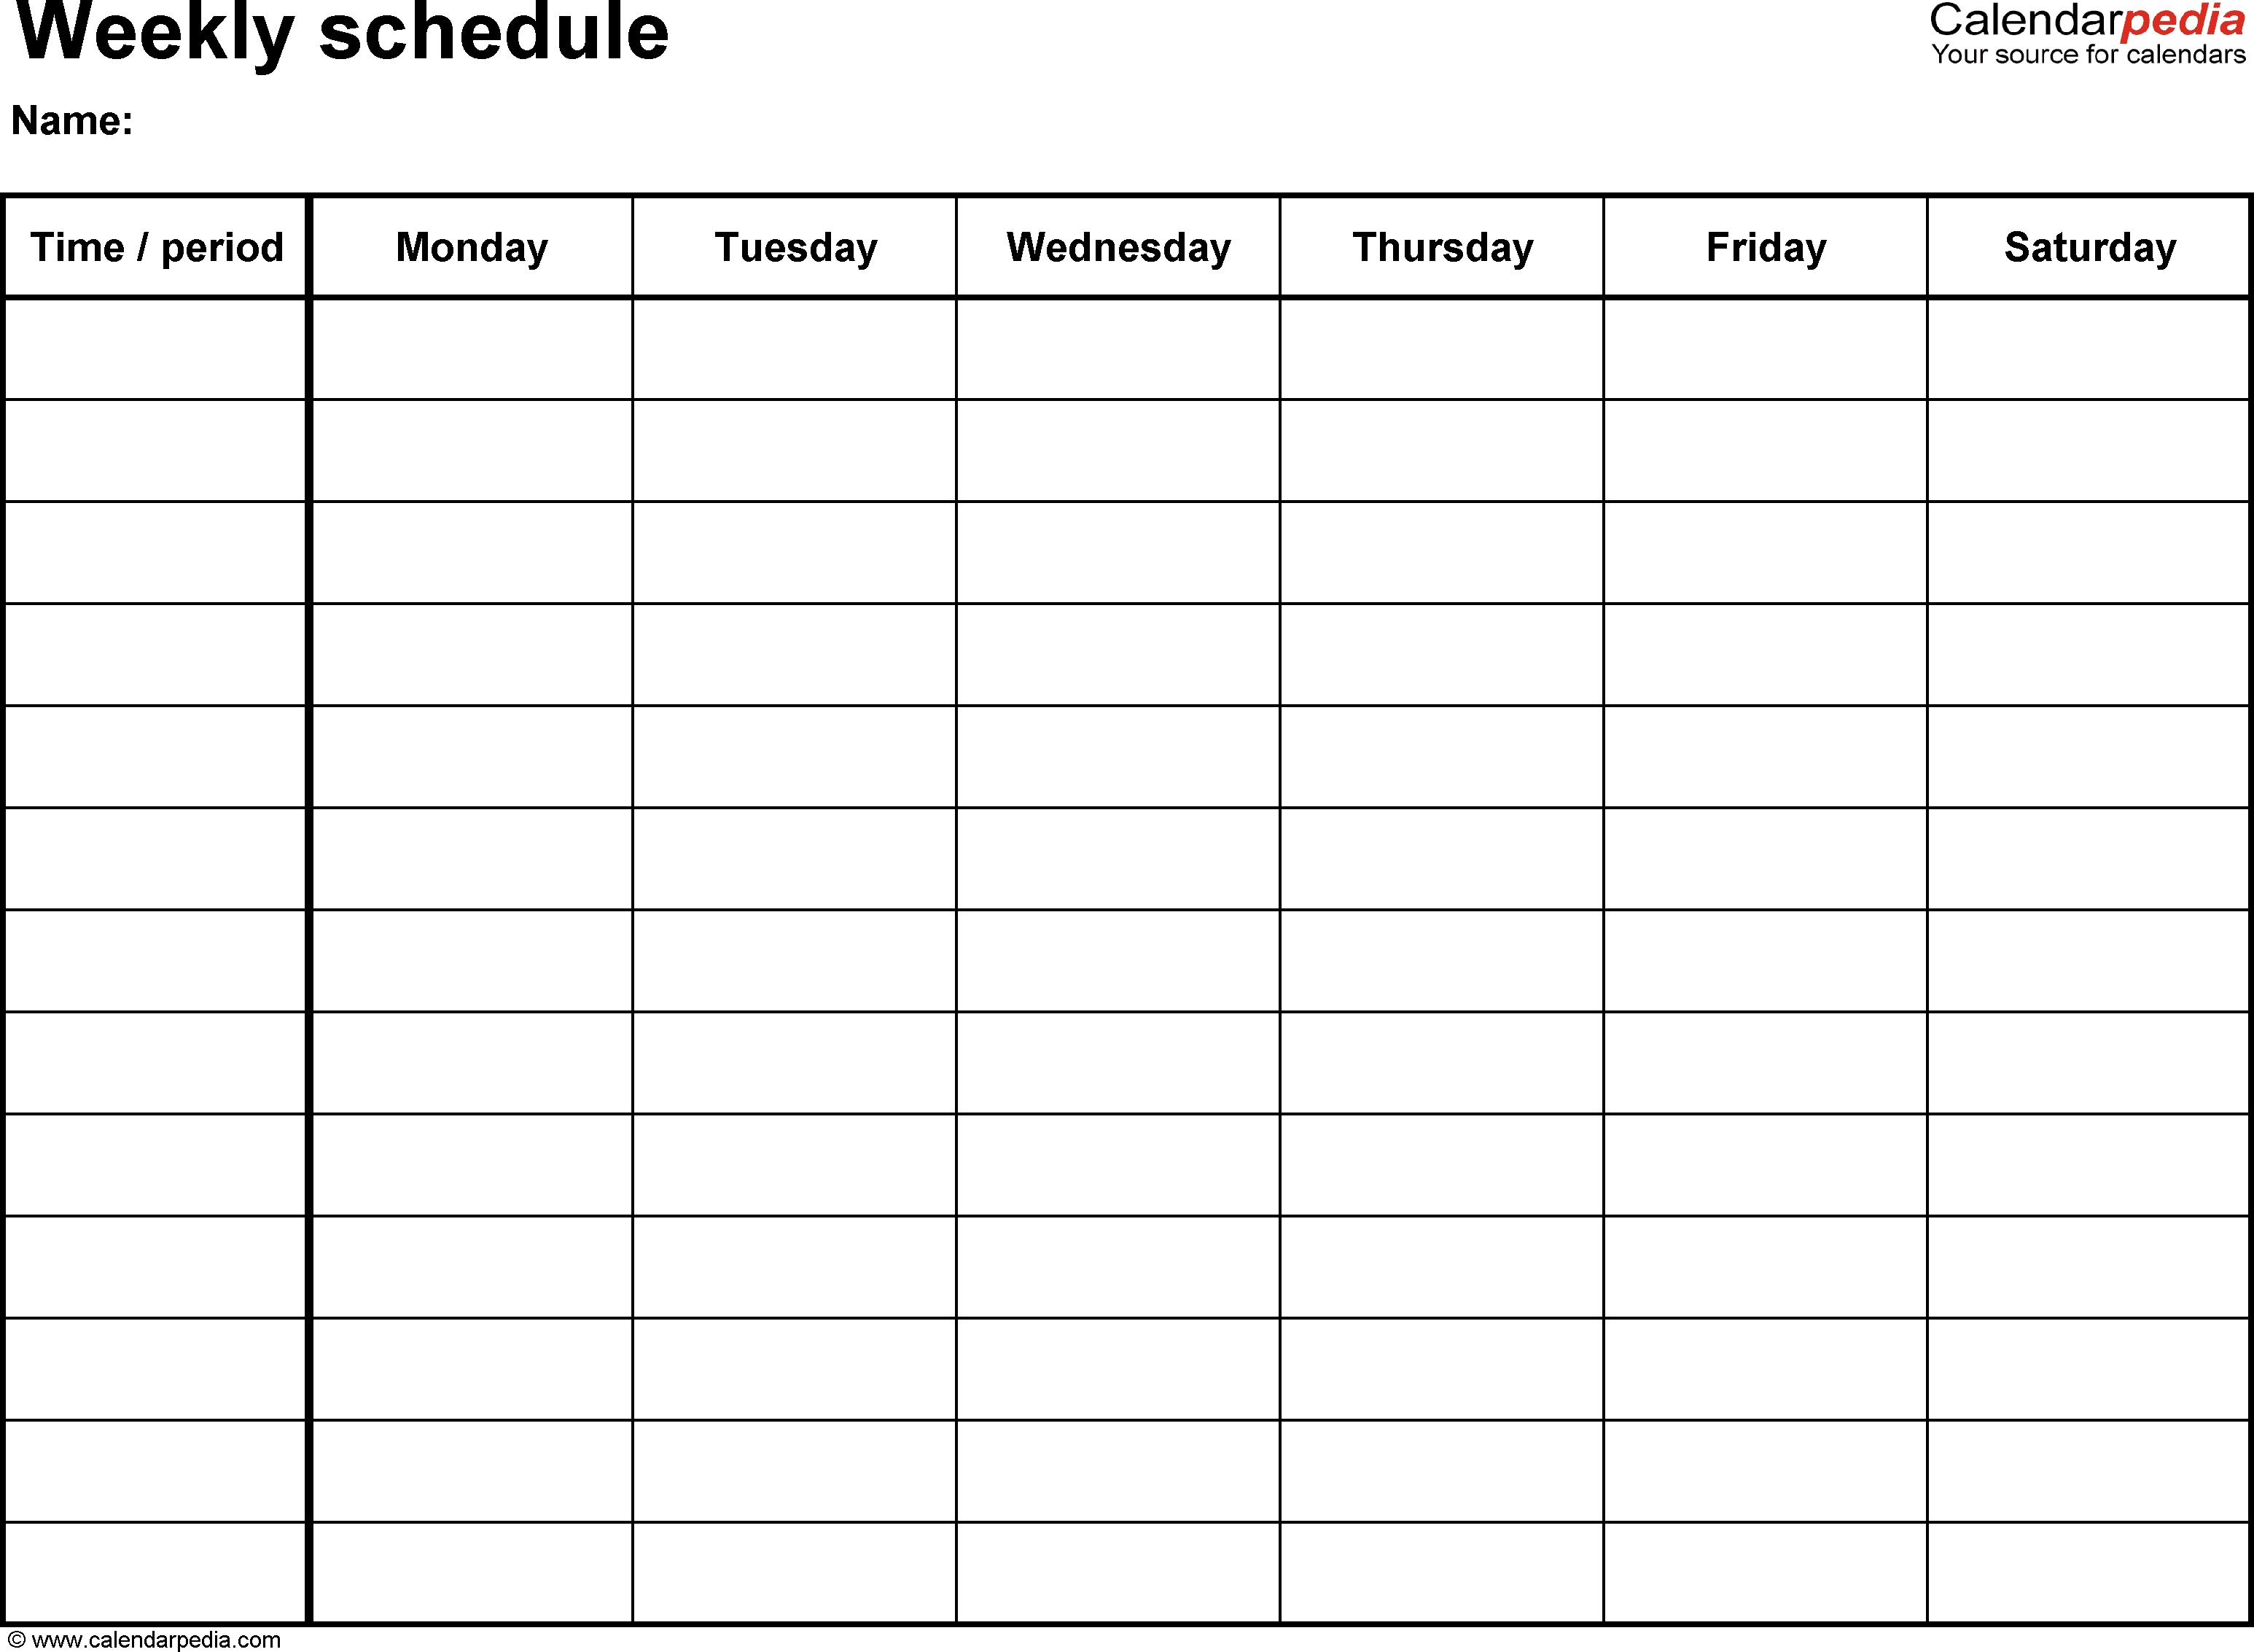 Free Weekly Schedule Templates For Excel - 18 Templates intended for 5 Day Weekly Timetable Blank 6 Periods